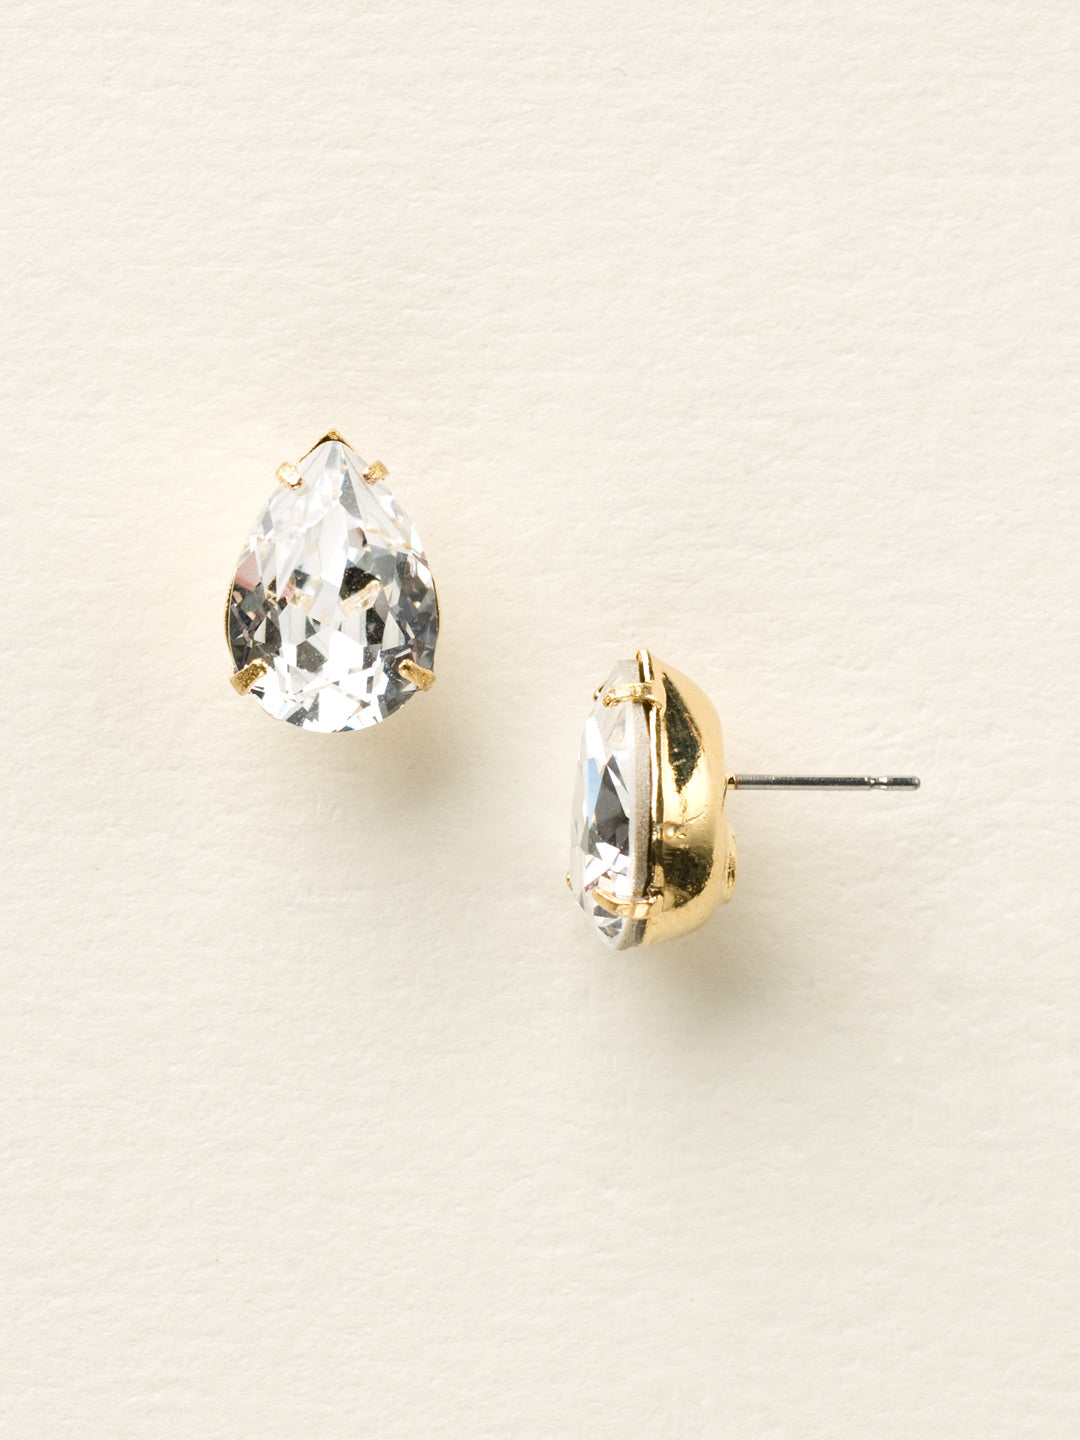 Ginnie Stud Earrings - ECR115BGCCL - <p>A beautiful basic stud. These classic single teardrop post earrings are perfect for any occasion, especially the everyday look. A timeless treasure that will sparkle season after season. From Sorrelli's Crystal Clear collection in our Bright Gold-tone finish.</p>